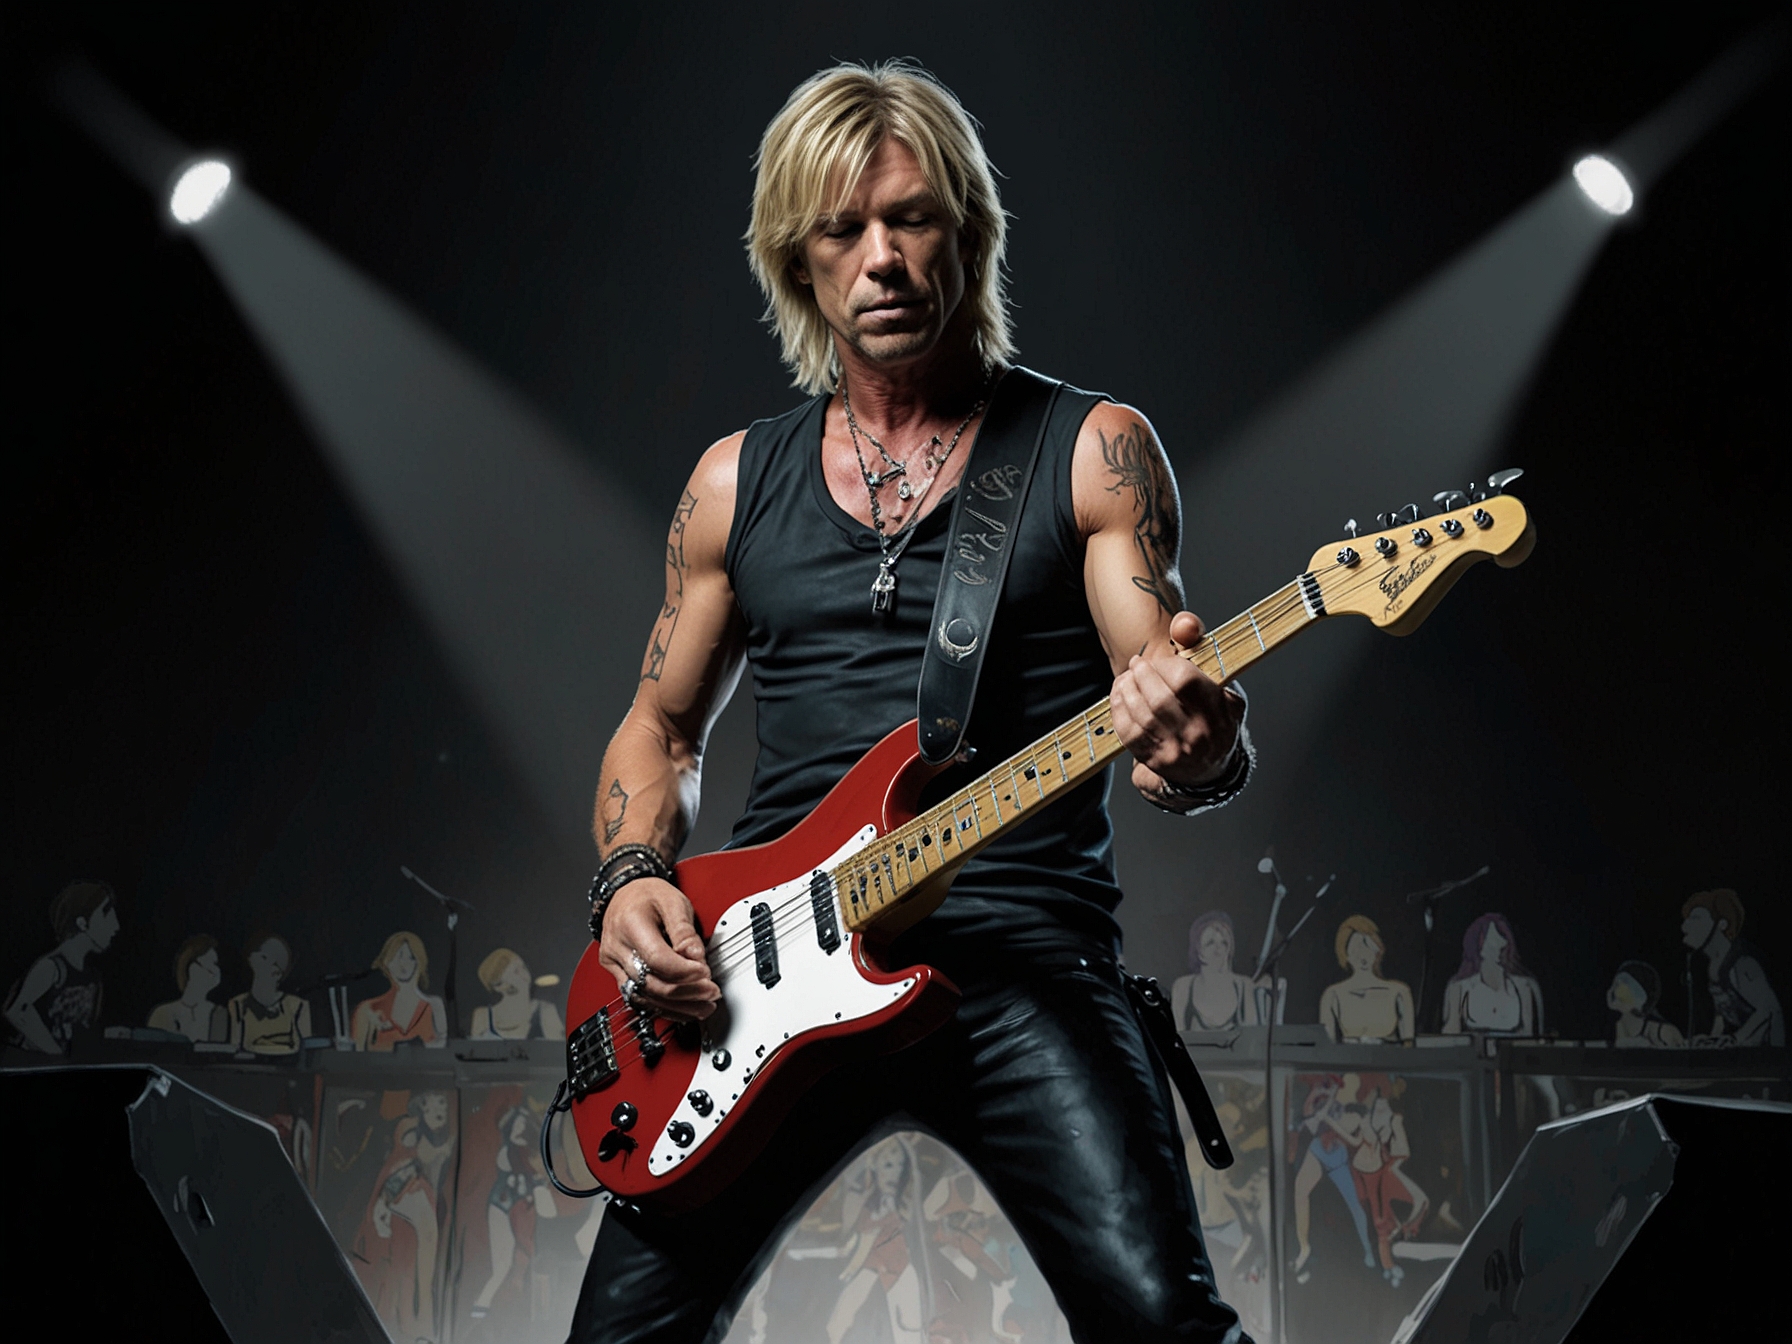 Duff McKagan playing the bass guitar on stage, representing his belief that Duff Beer was named after him, adding a rock and roll twist to the story.